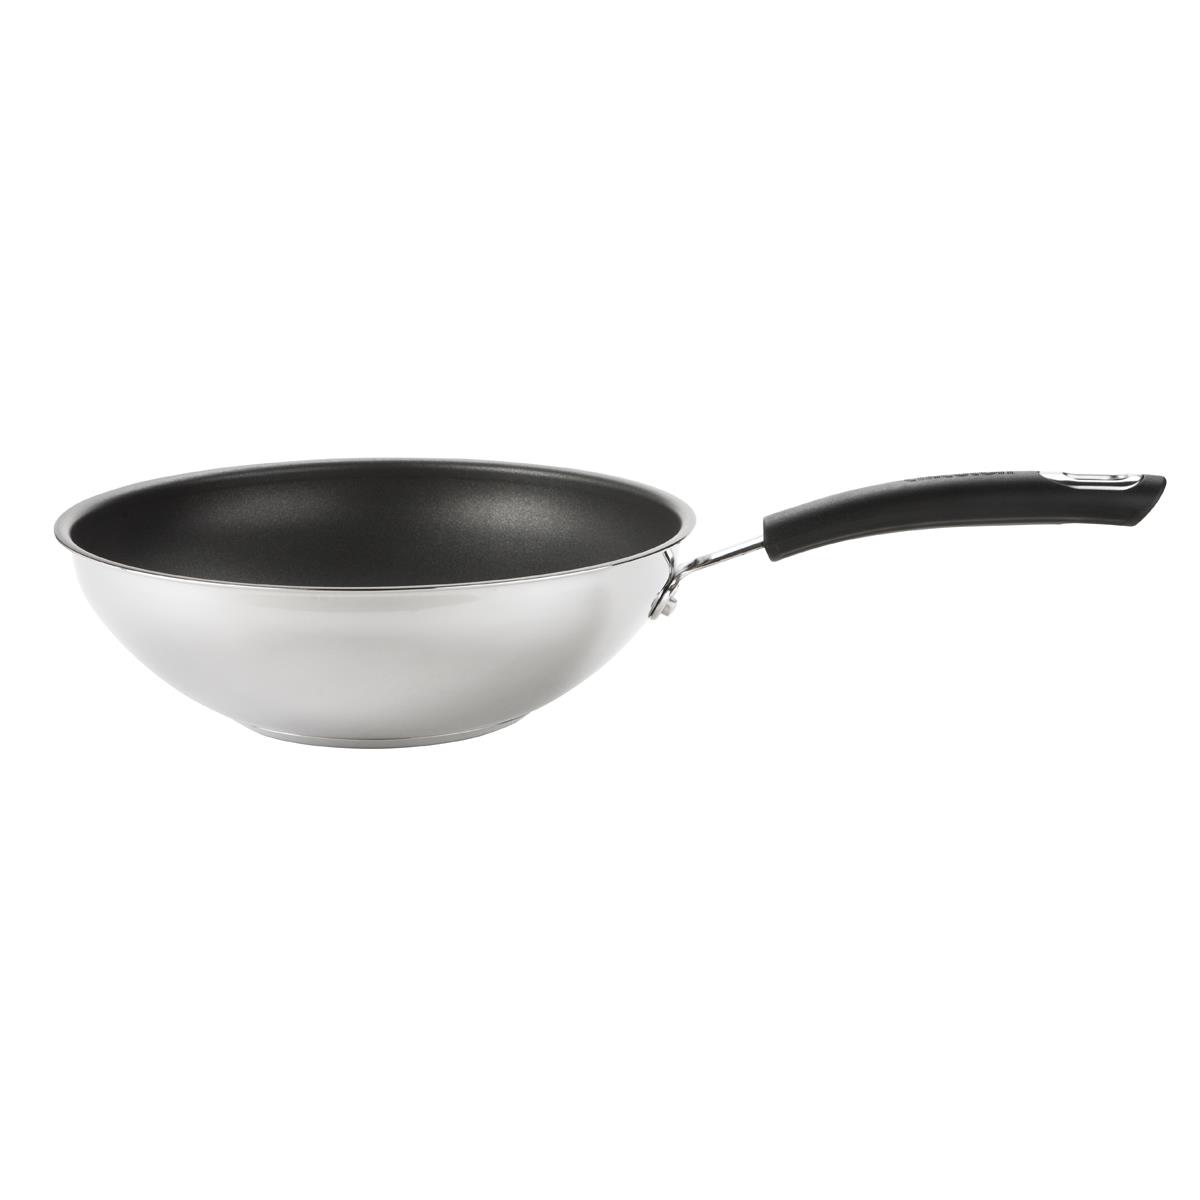 What's the pan's diameter (excl. handles)?